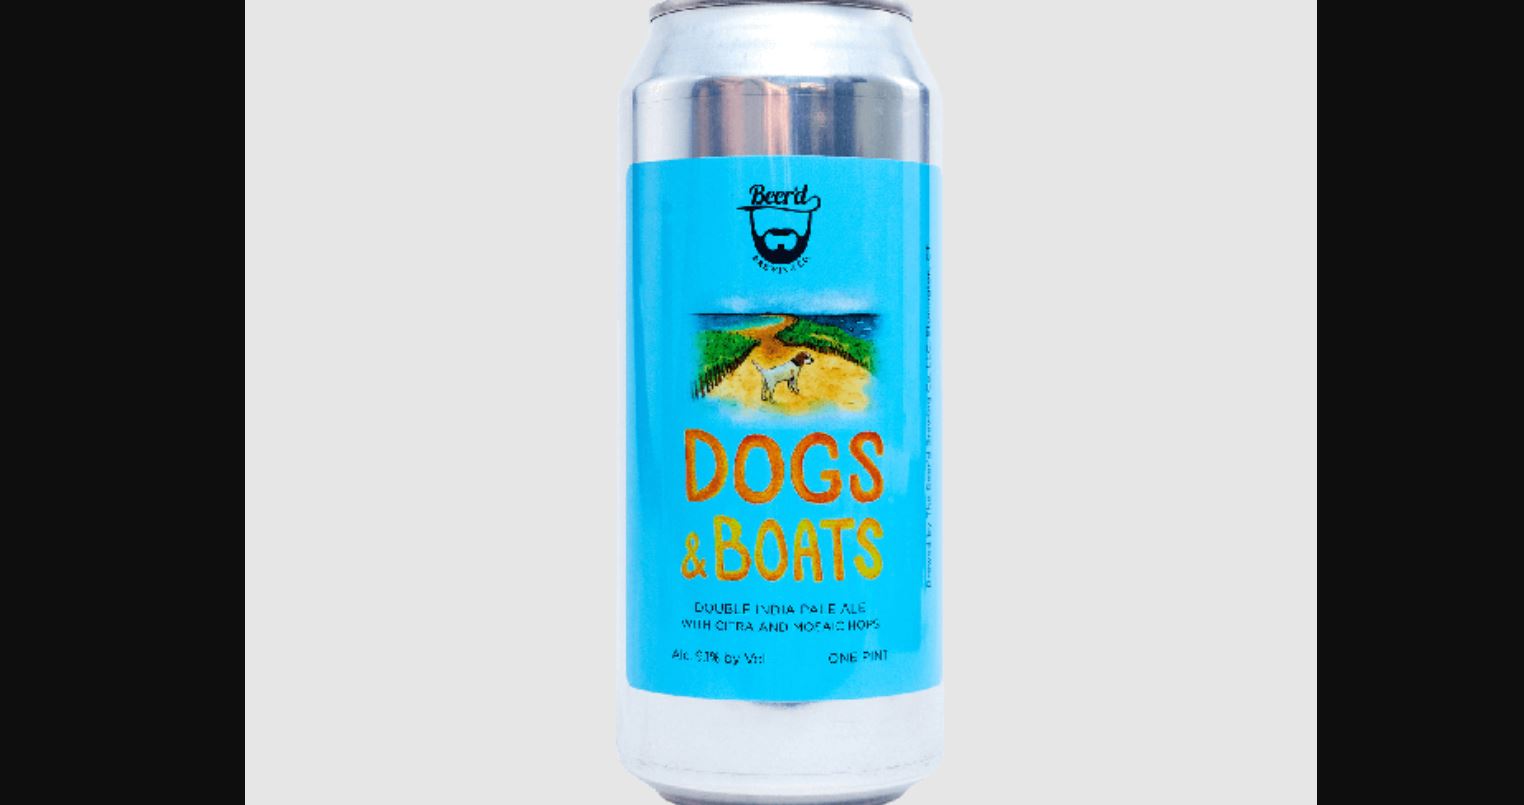 Beer'd Dogs + Boats